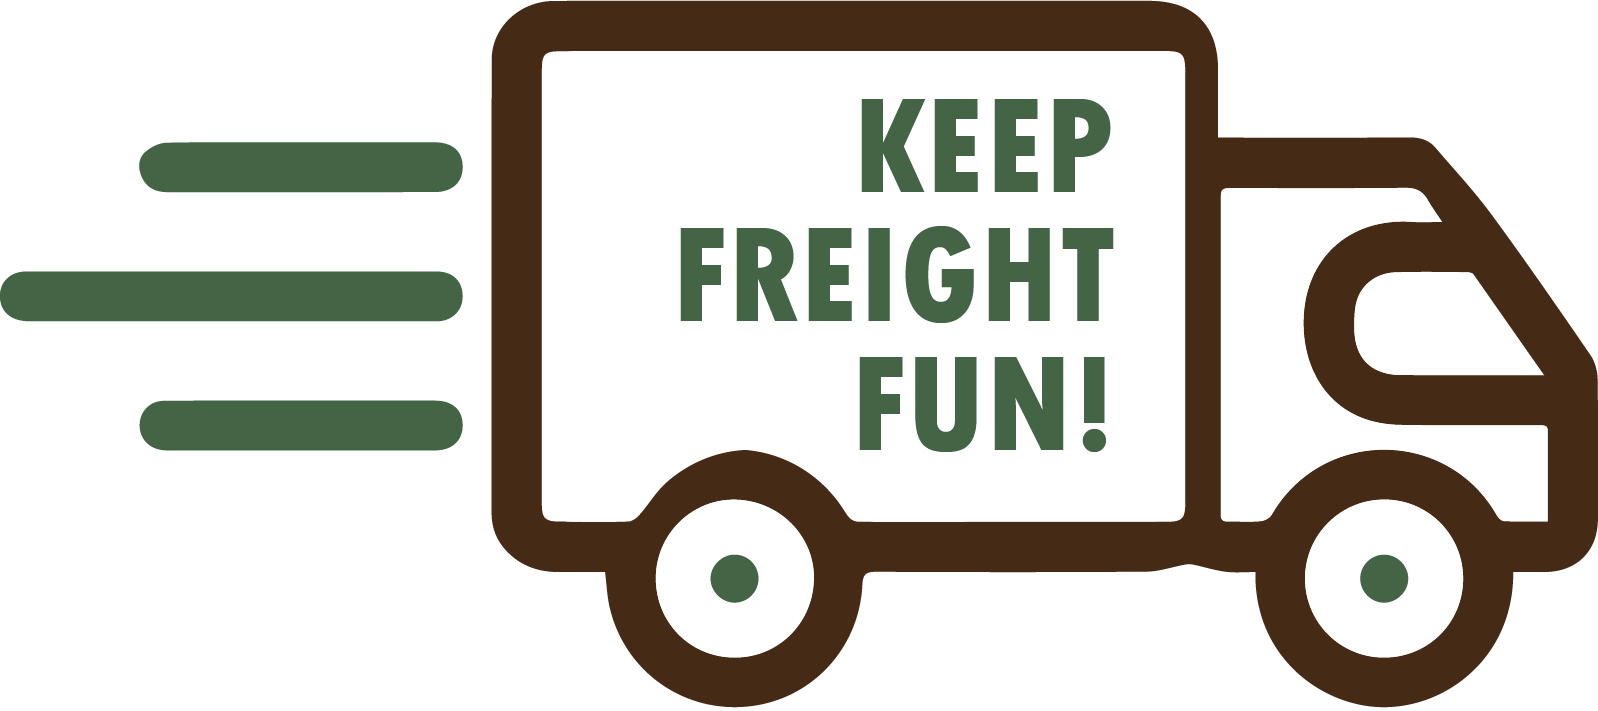 Low 6% Dispatch Fee! Carriers -No forced dispatch, preferred lanes, quick pay! Drive for an established logistics company in USA and Canada. Freight Yeah! Tyger Logistics -Keep Freight Fun! Box Truck Icon